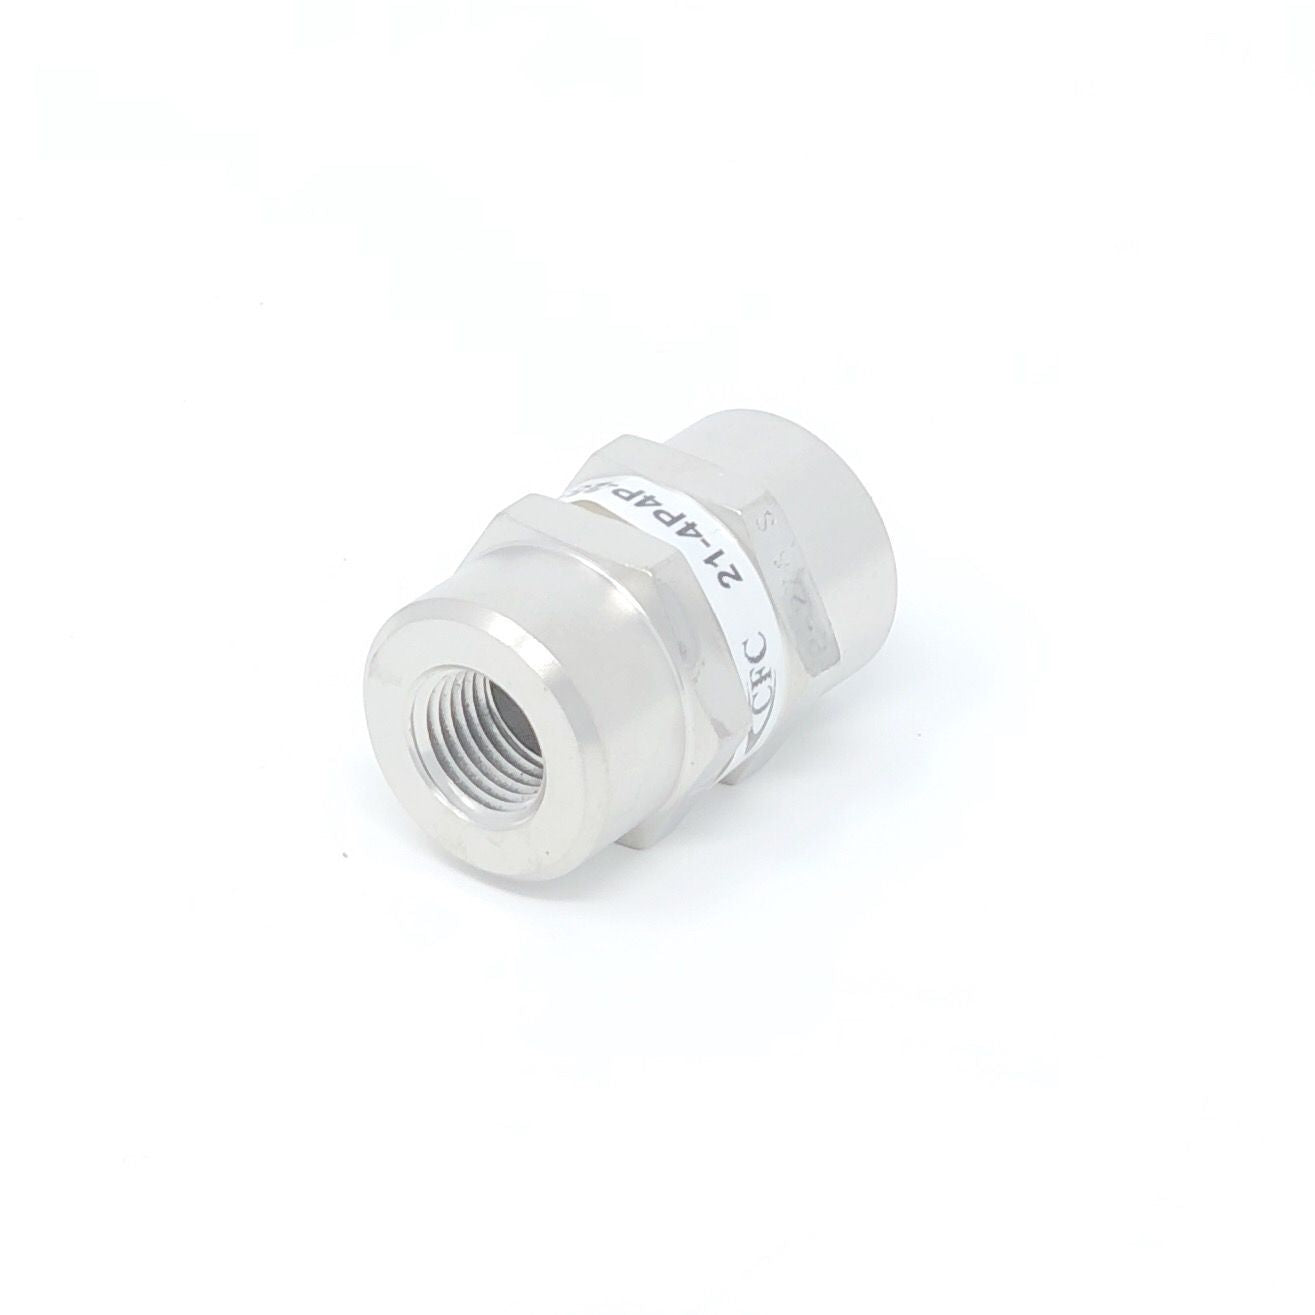 21-8N8N-100S : Chase High Pressure Inline Filter, 3000psi, 1/2" NPT, 100 Micron, No Visual Indicator, No Bypass